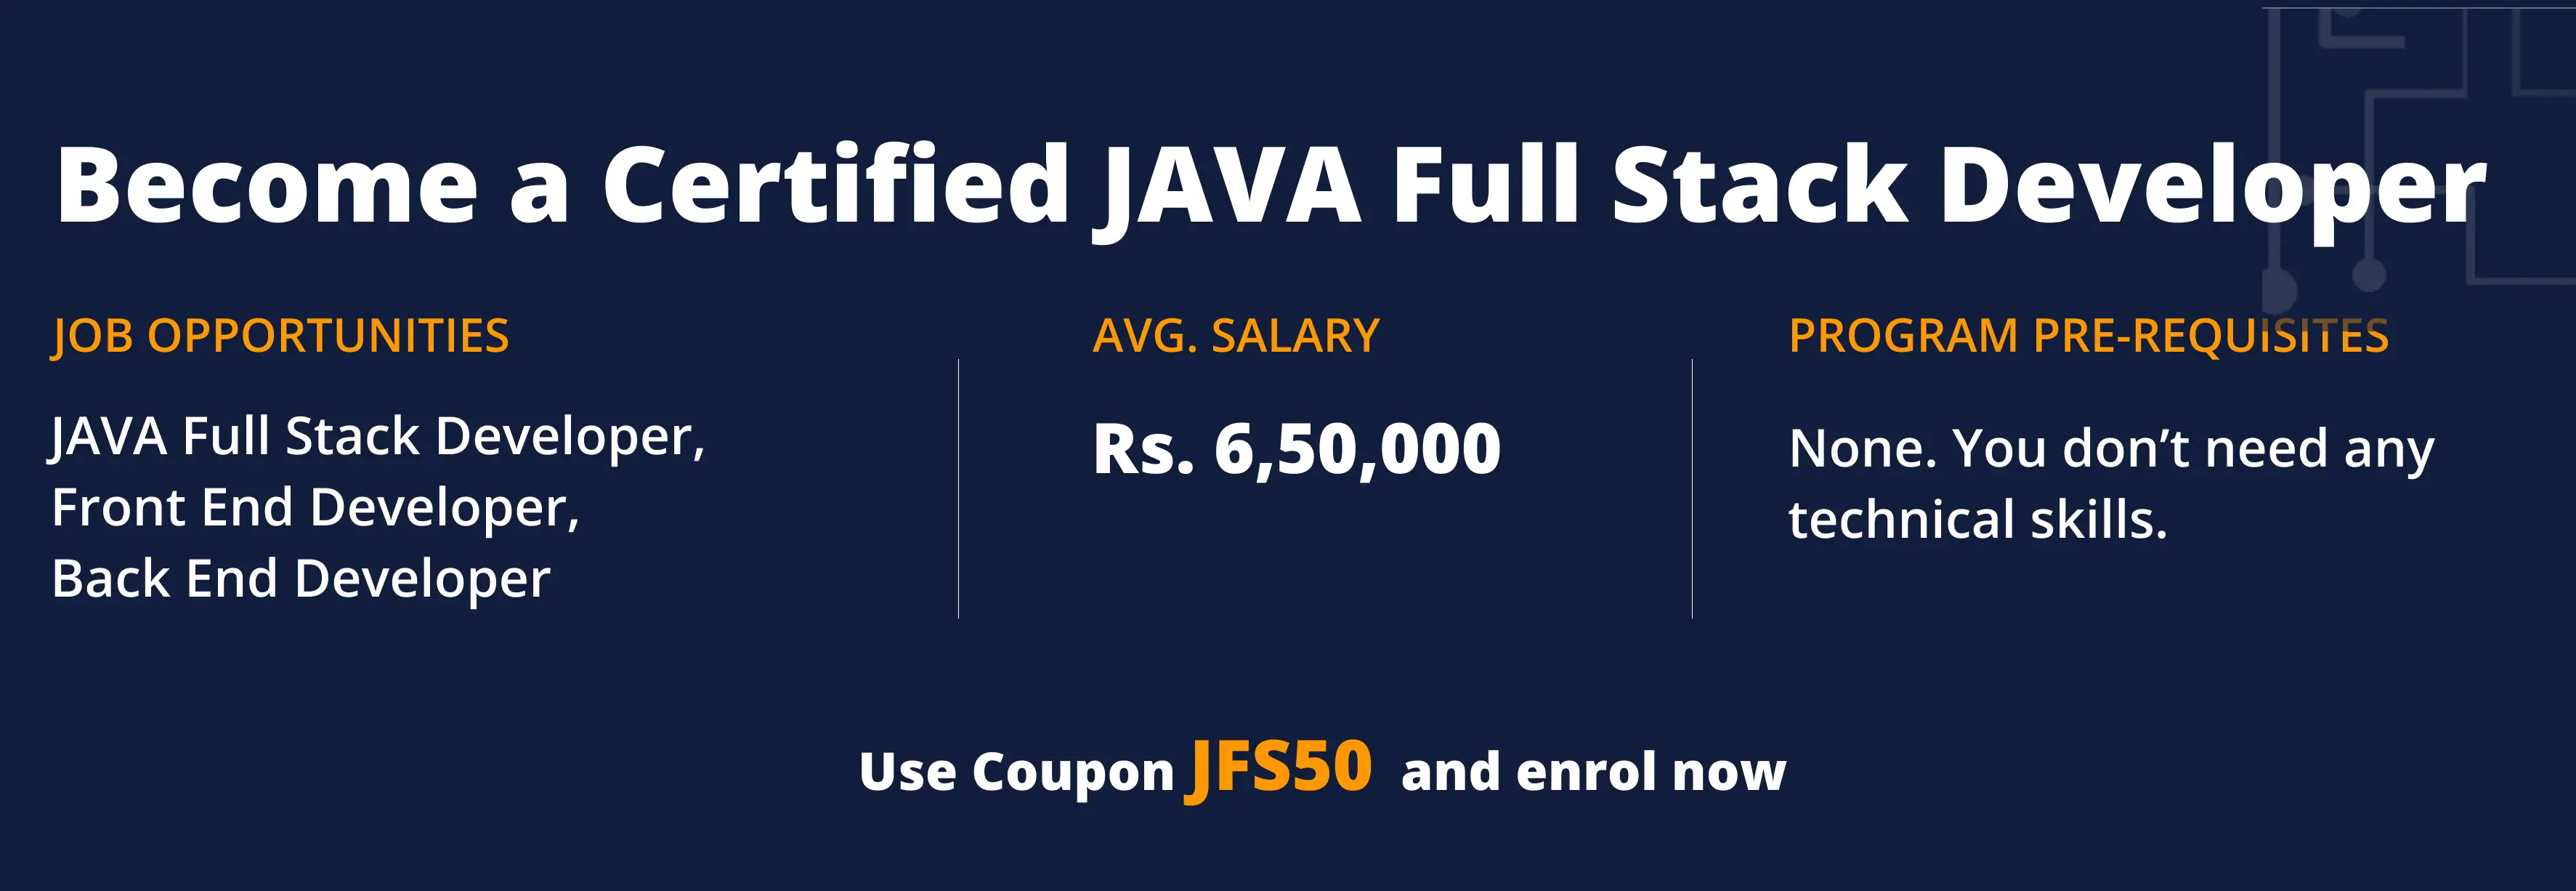 Full Stack Java Developer: Role, Career Opportunities and Salary